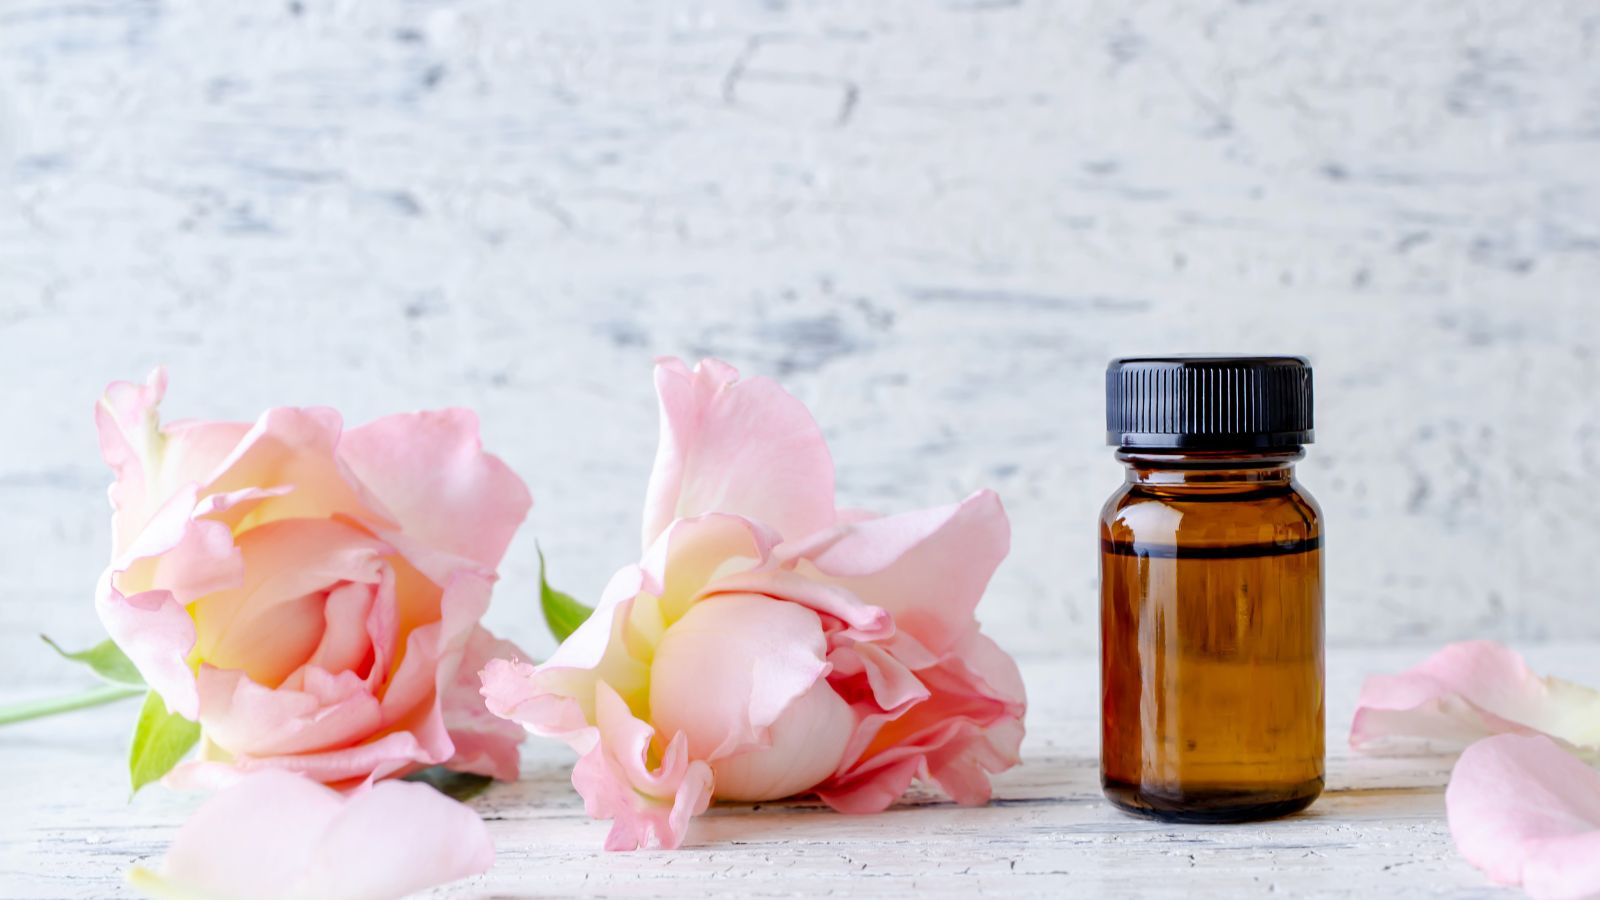 Uses and Benefits of Rose essential oil - image of two pink roses on a pale blue background with a bottle of rose essential oil next to it